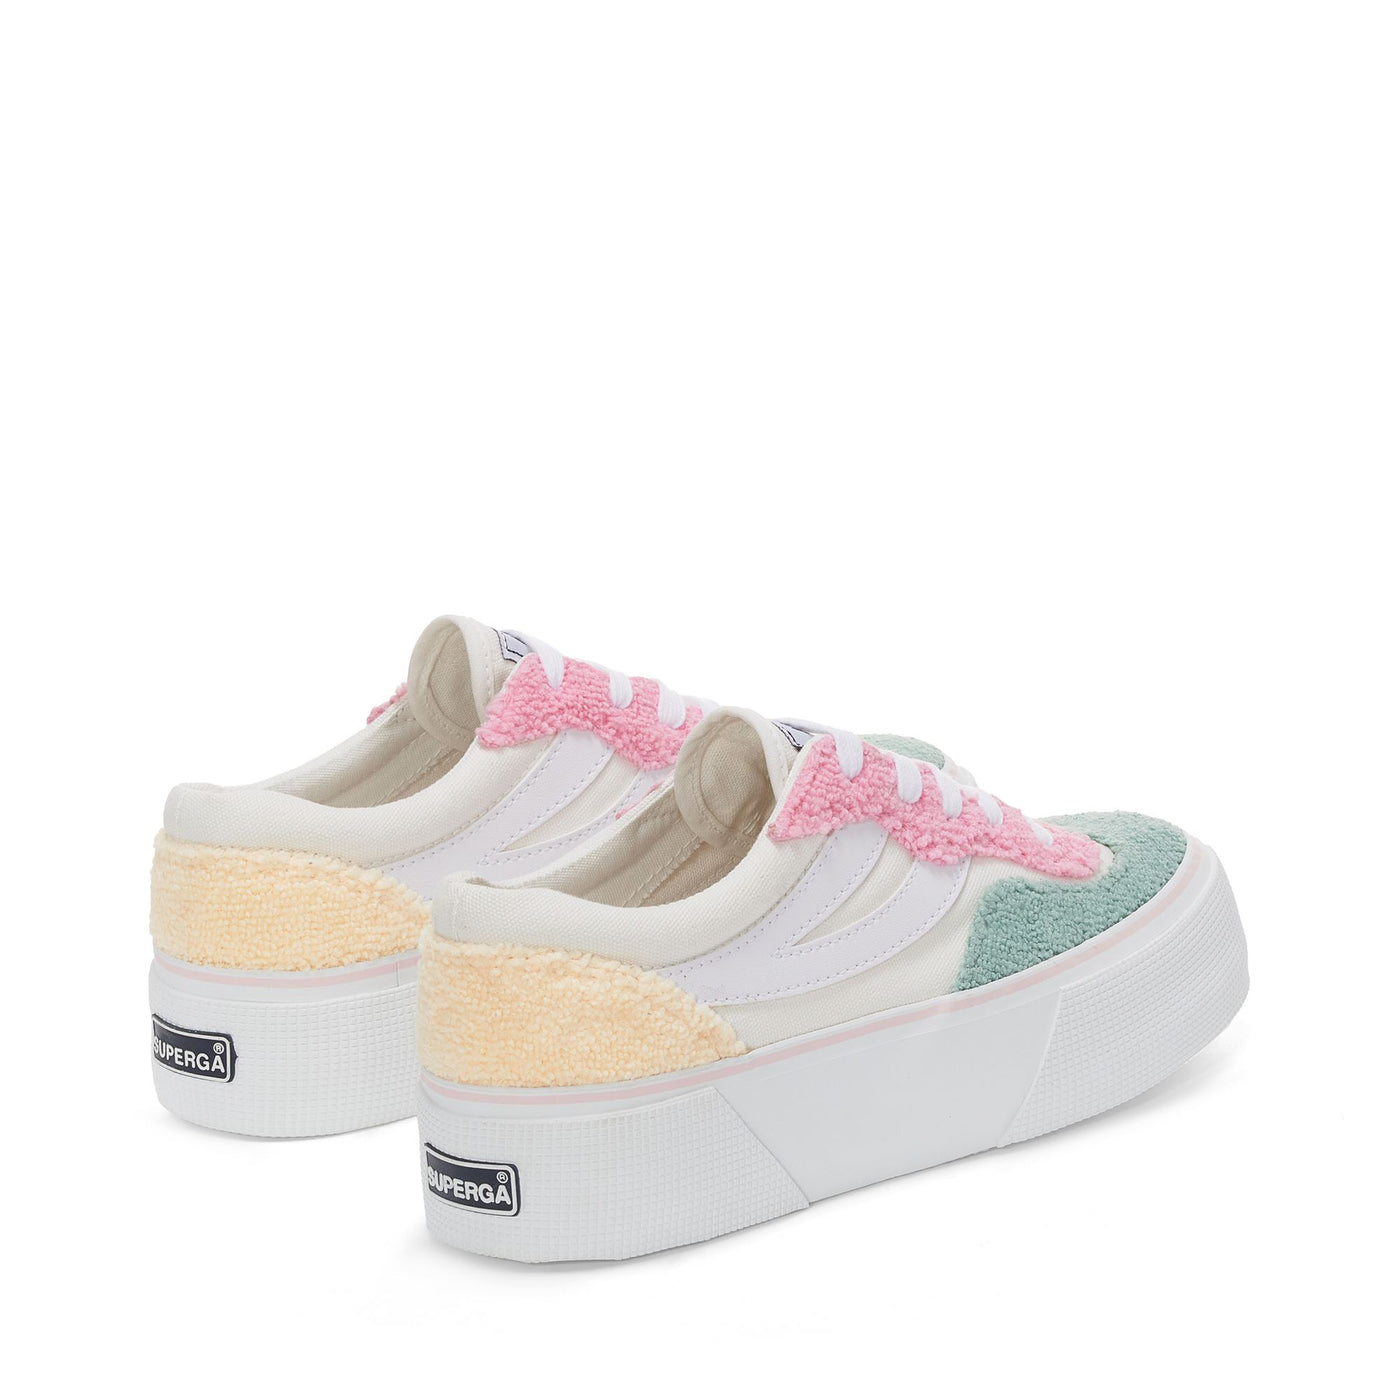 Sneakers Woman 3041 REVOLLEY PLATFORM TERRY CLOTH Wedge WHITE AVORIO-PINK-WHITE ICING-GREEN SAGE Dressed Side (jpg Rgb)		